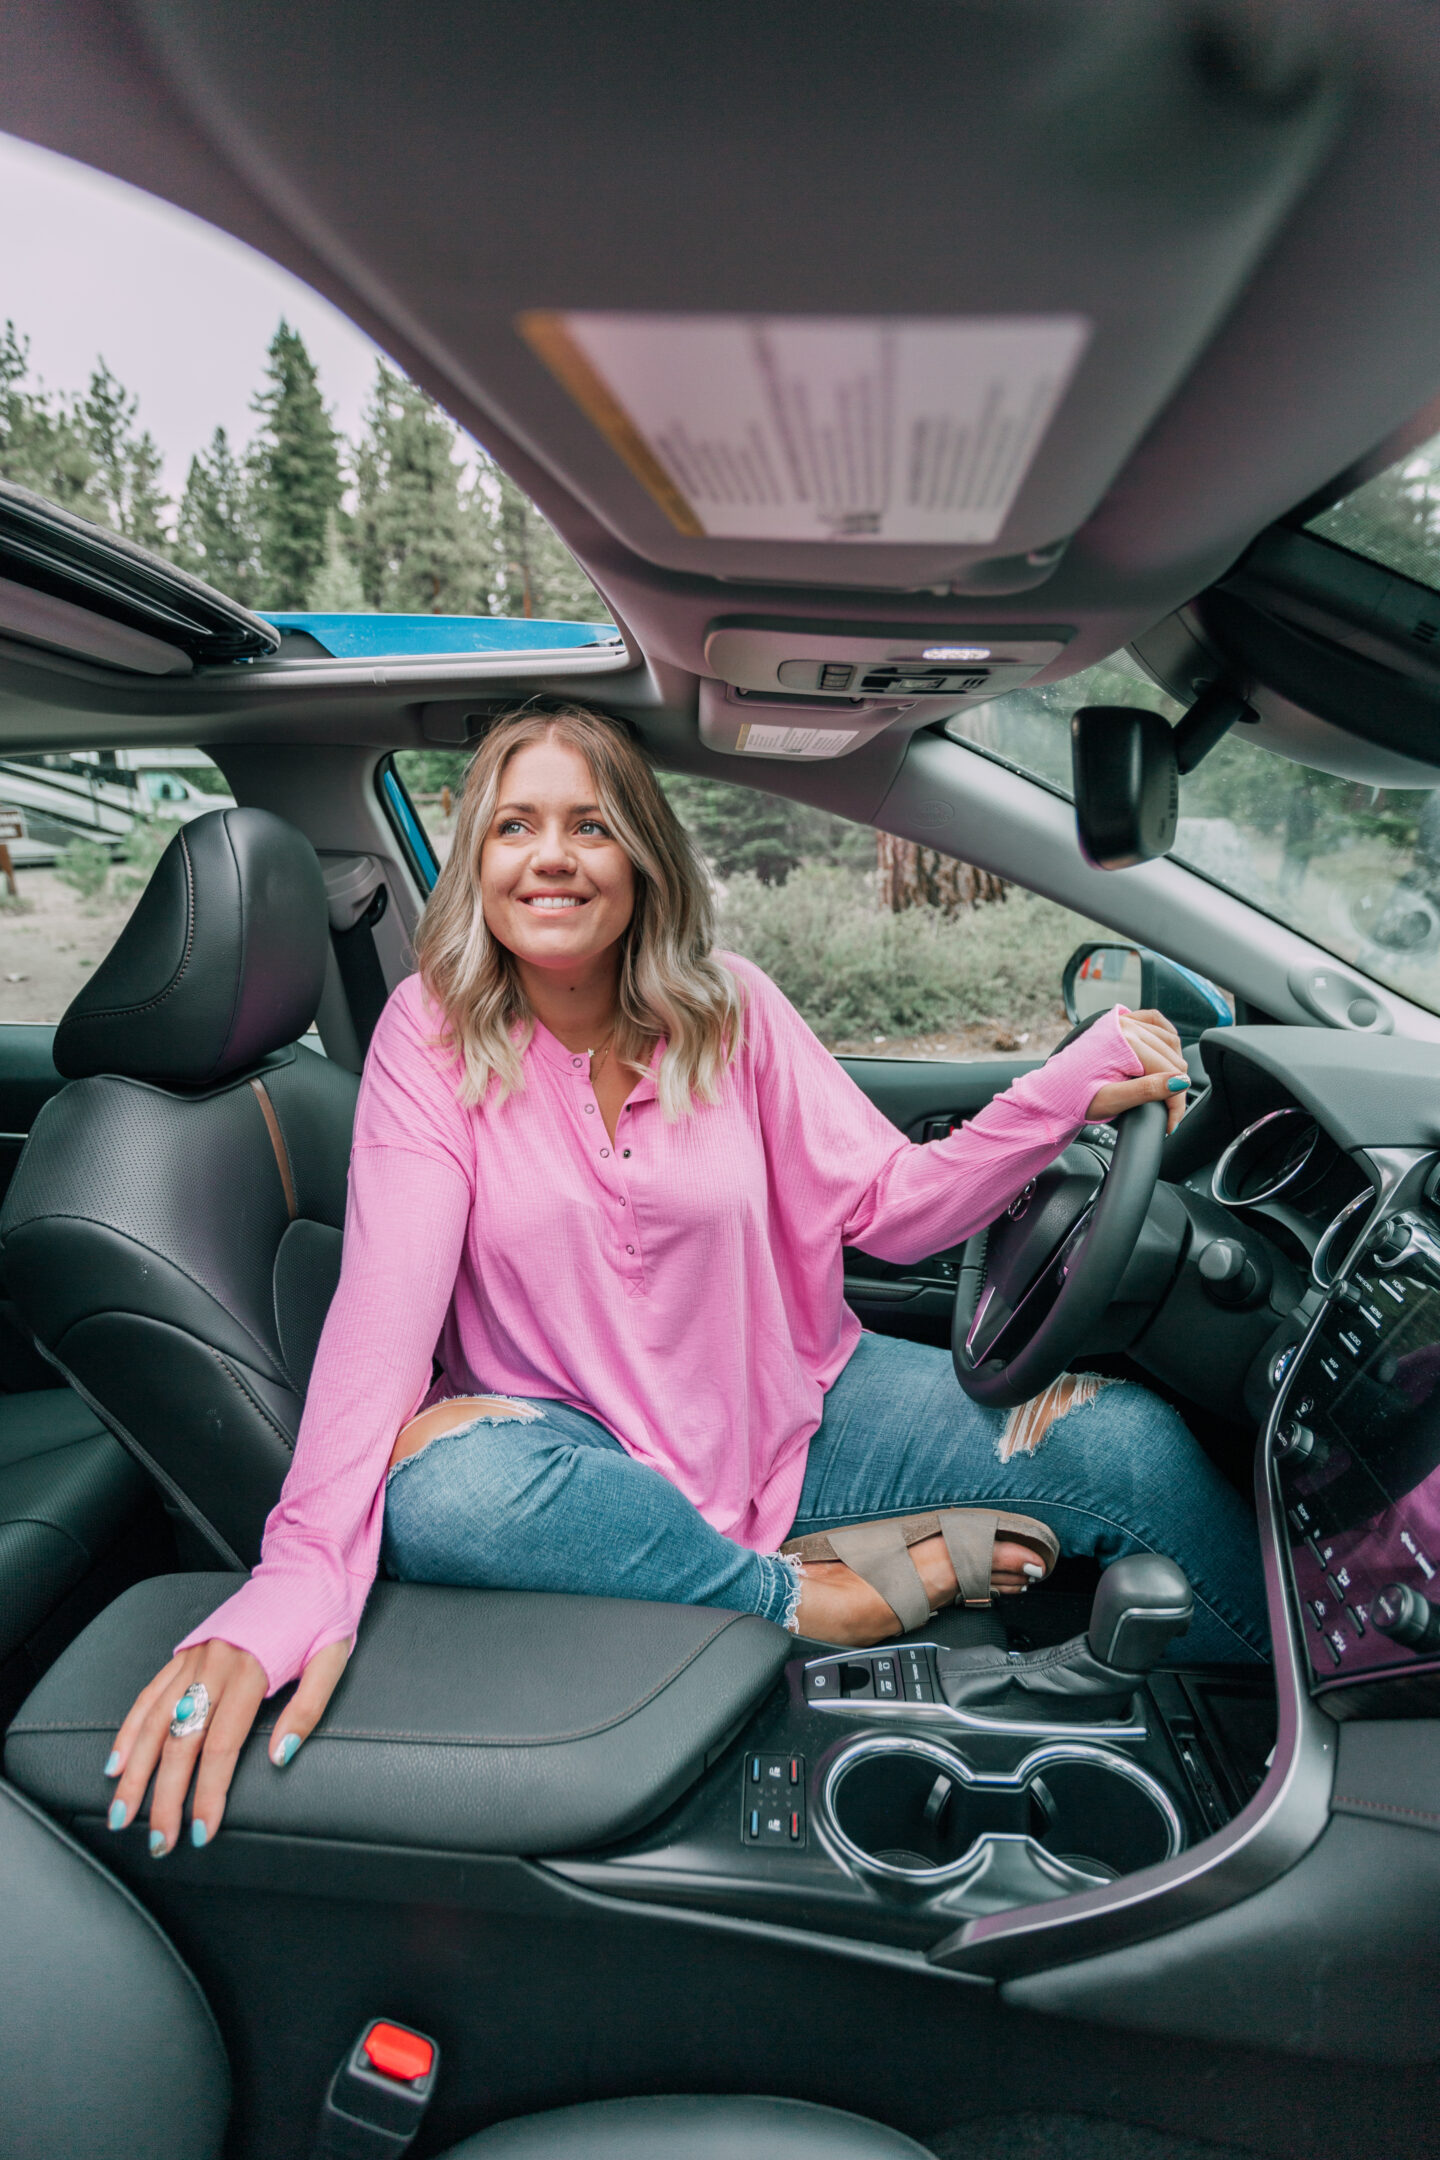 LAKE TAHOE ROAD TRIP WITH THE 2020 TOYOTA CAMRY HYBRID